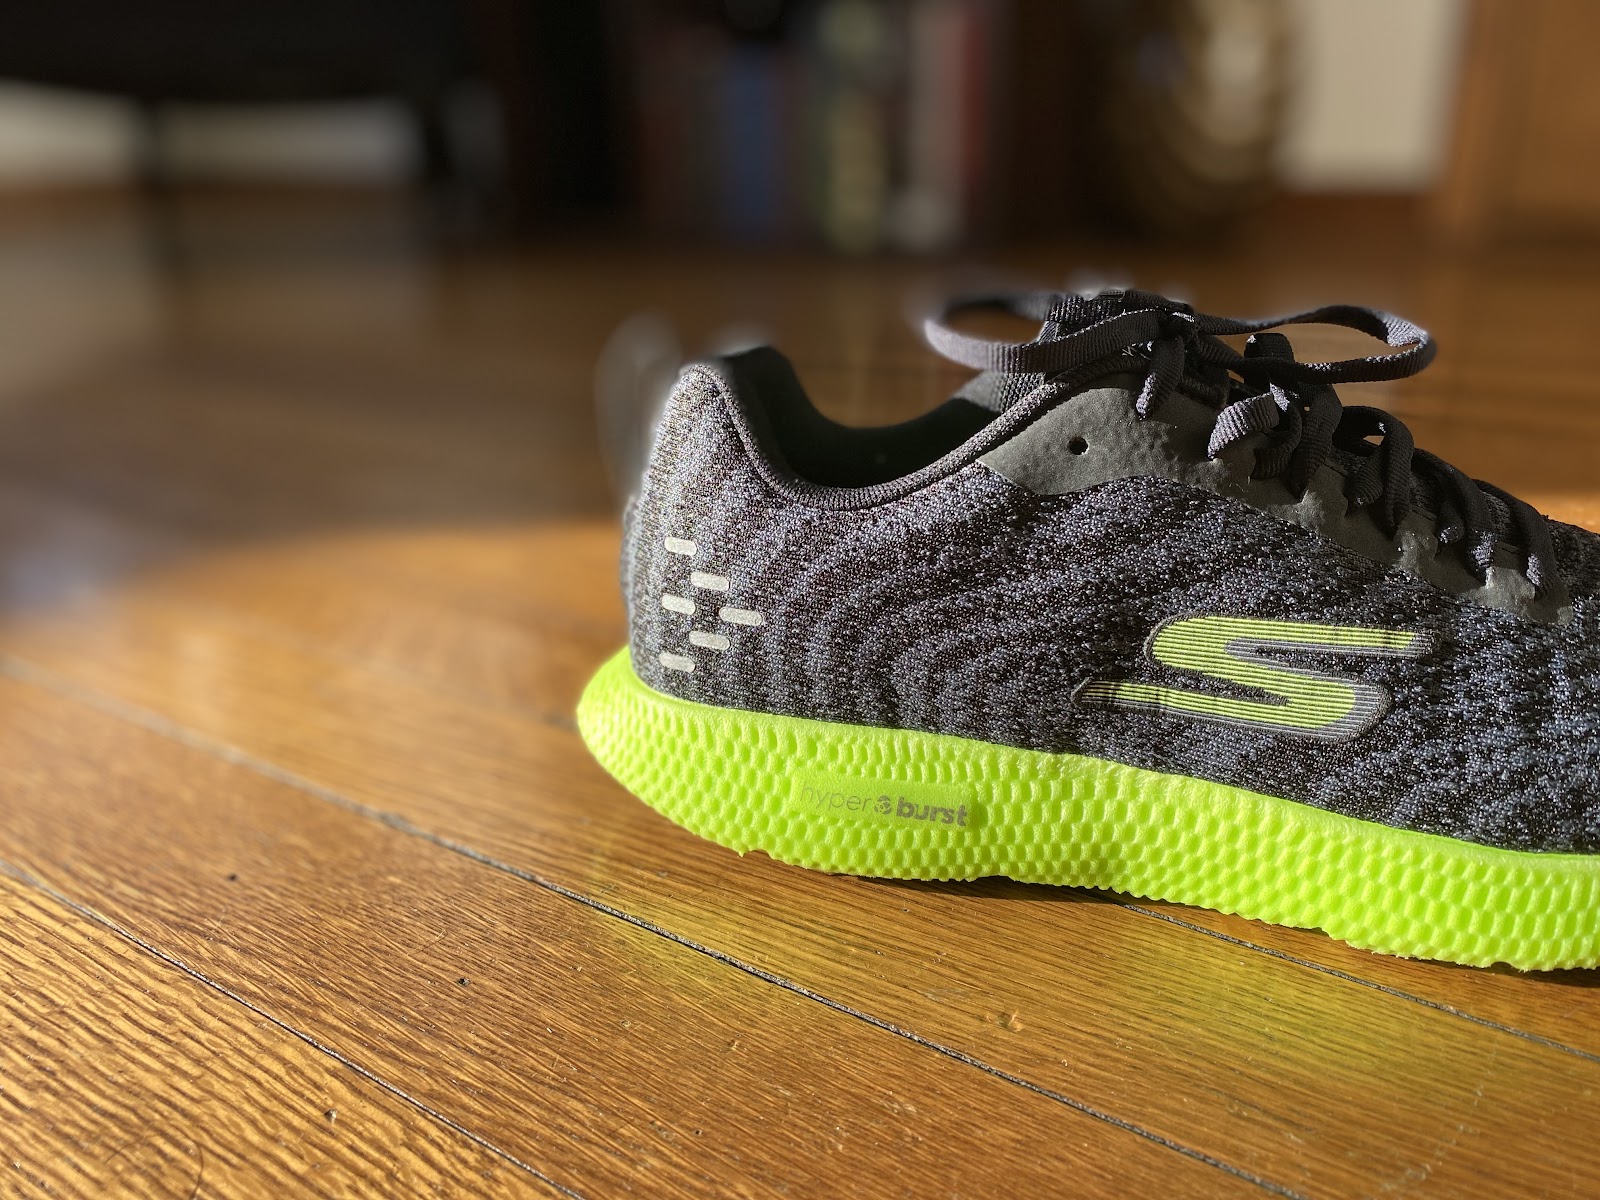 Road Run: Skechers Performance Go 7+ Hyper Multi Tester Review: A Ride Gets a Worthy Upper